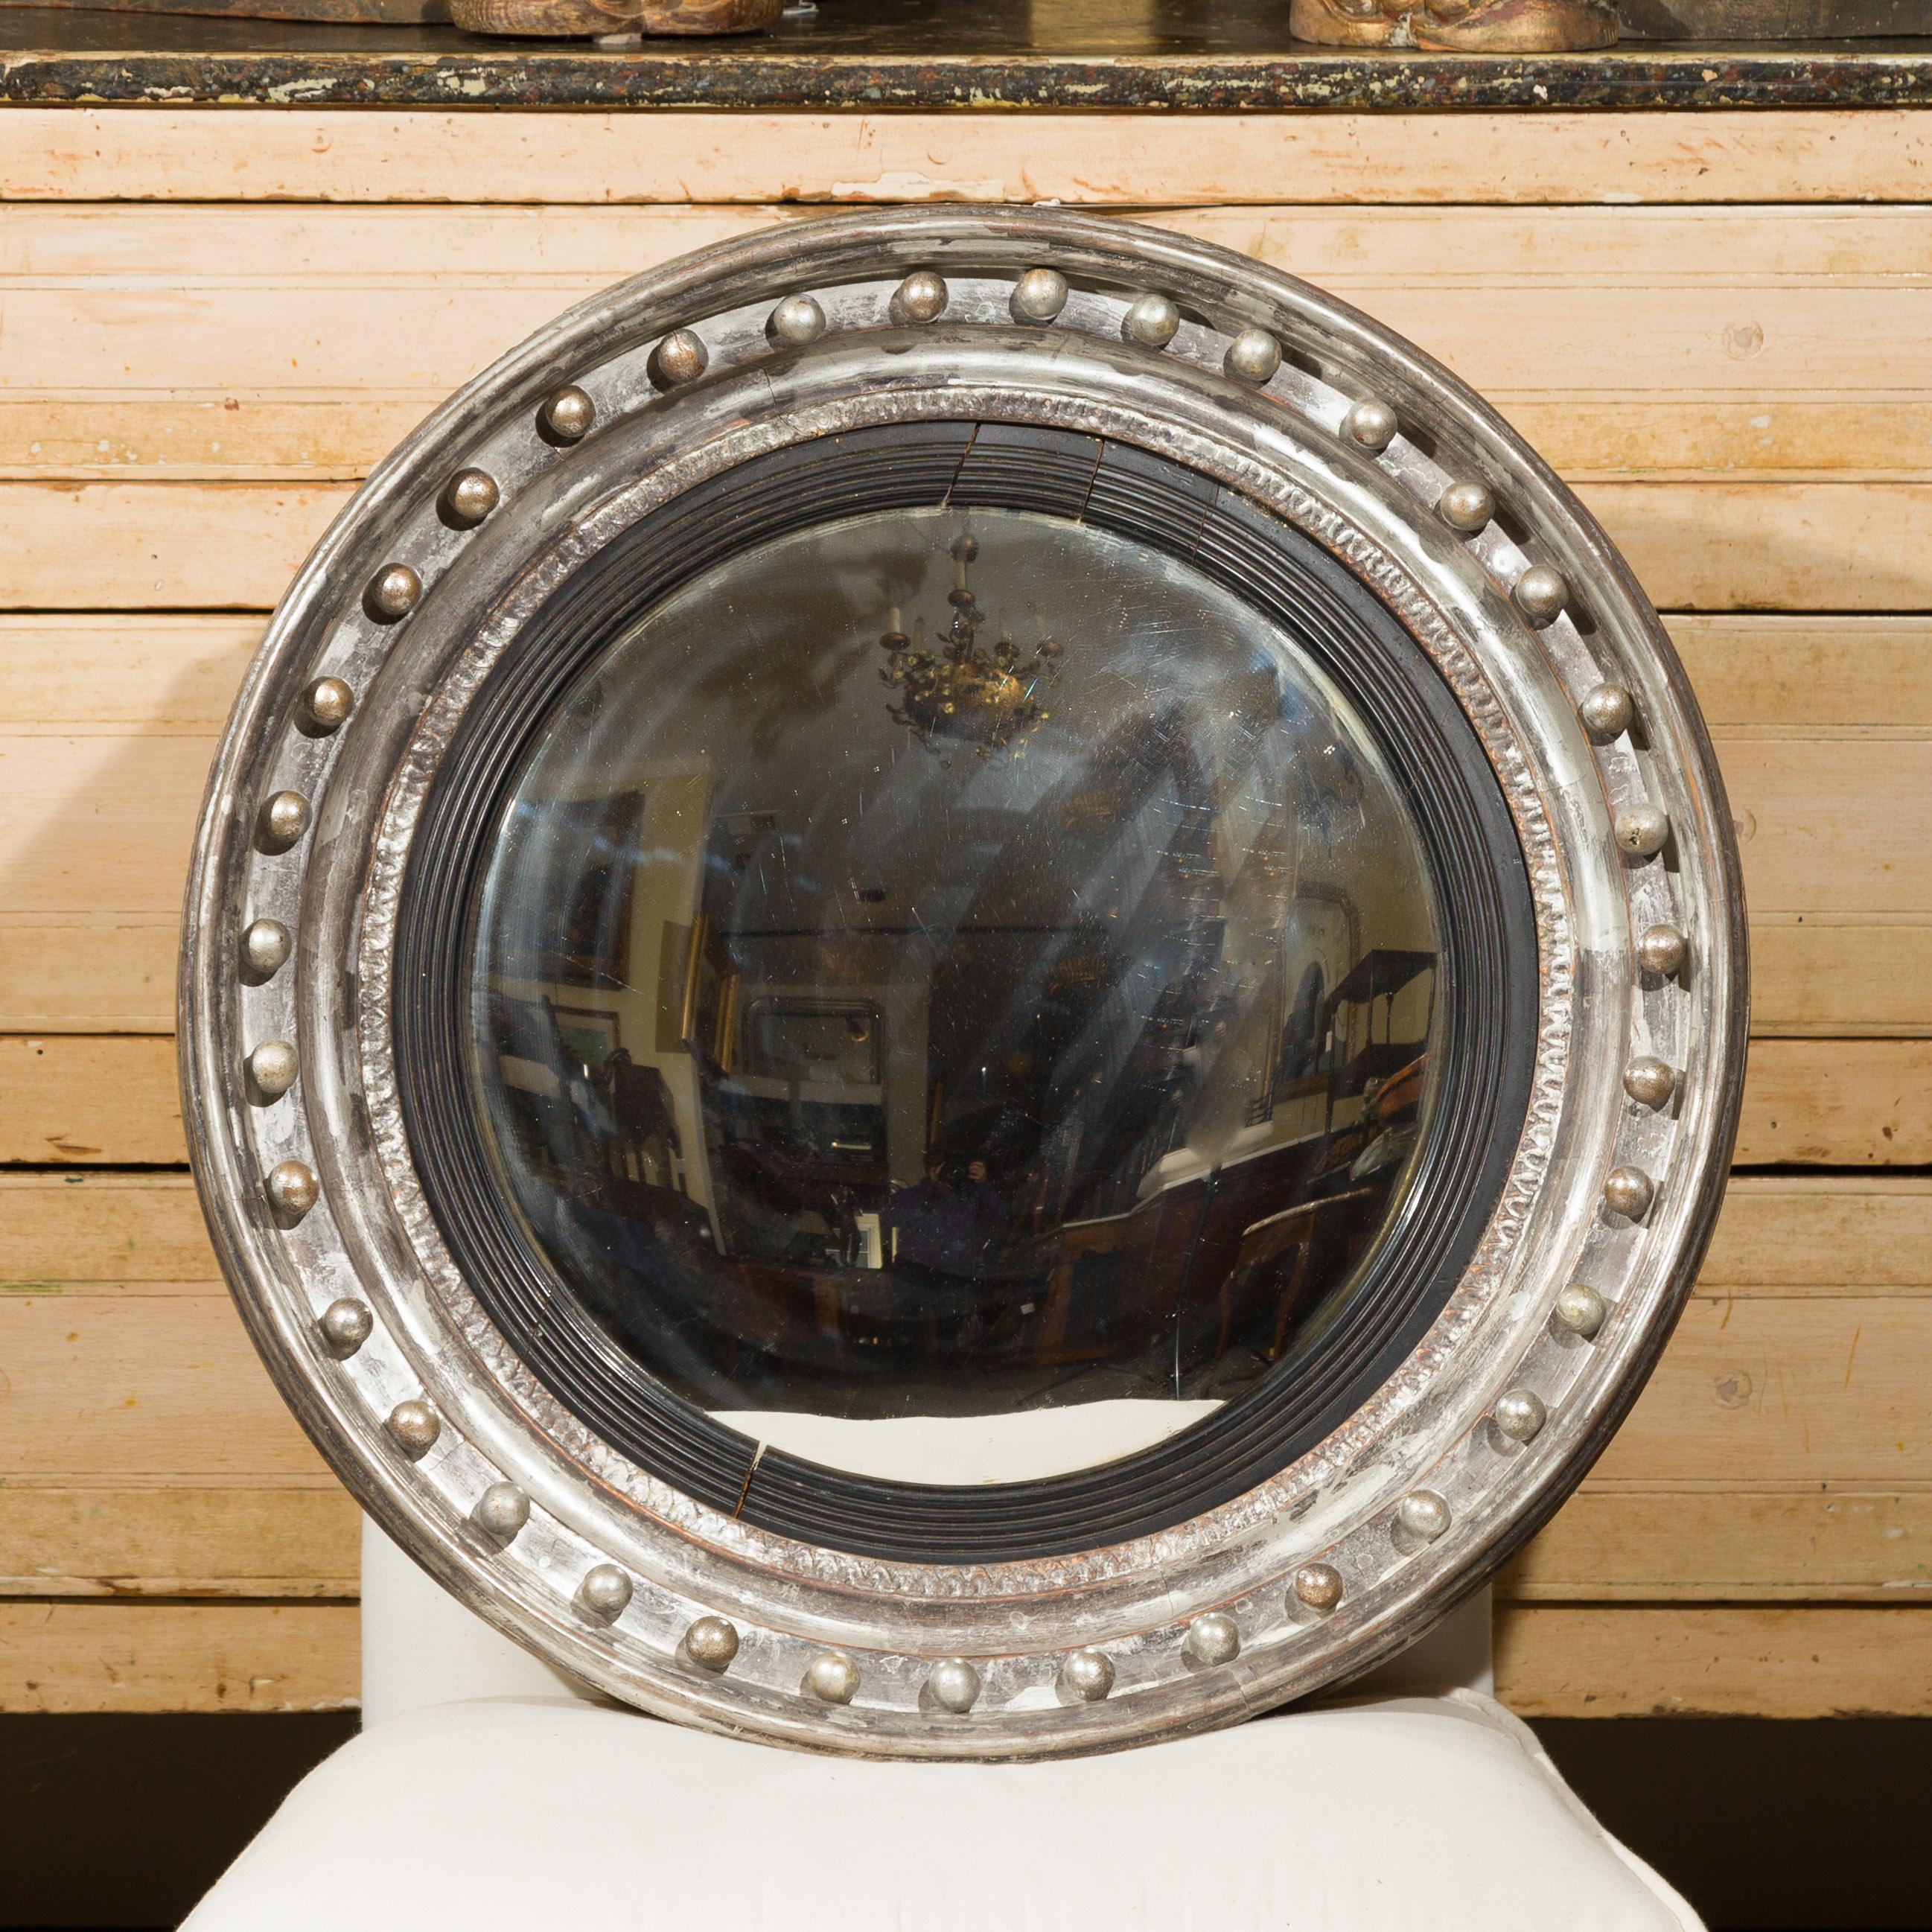 An English silver leaf bull's-eye convex girandole mirror from the mid-19th century with ebonized reeded accents. Born in England during the third quarter of the 19th century, this circular mirror features a convex mirror plate, surrounded by a